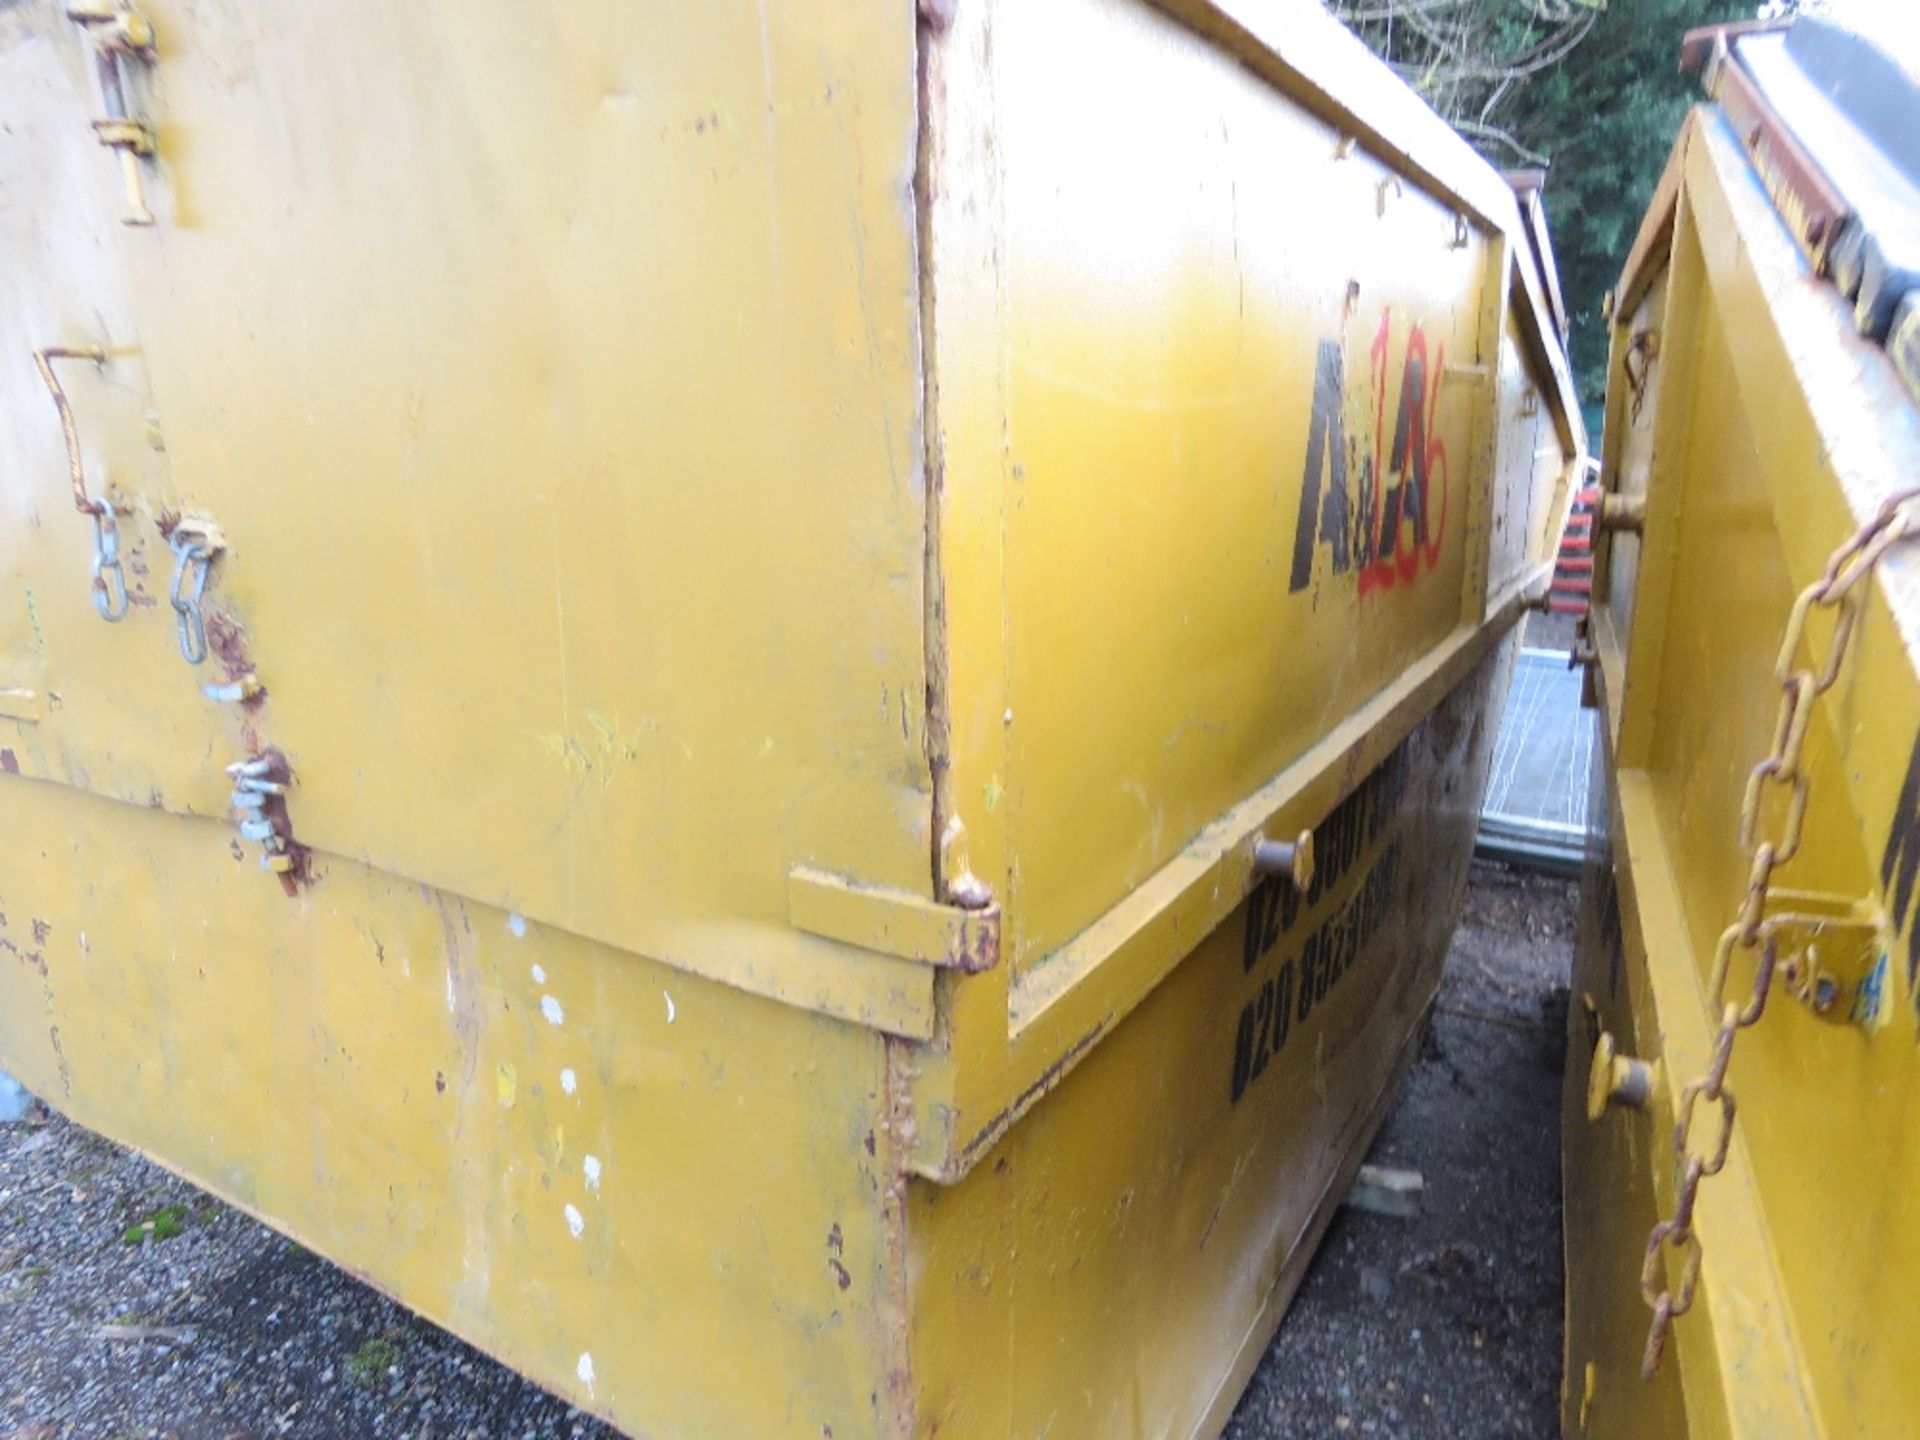 LARGE SIZED ENCLOSED CHAIN LIFT WASTE SKIP. - Image 3 of 5